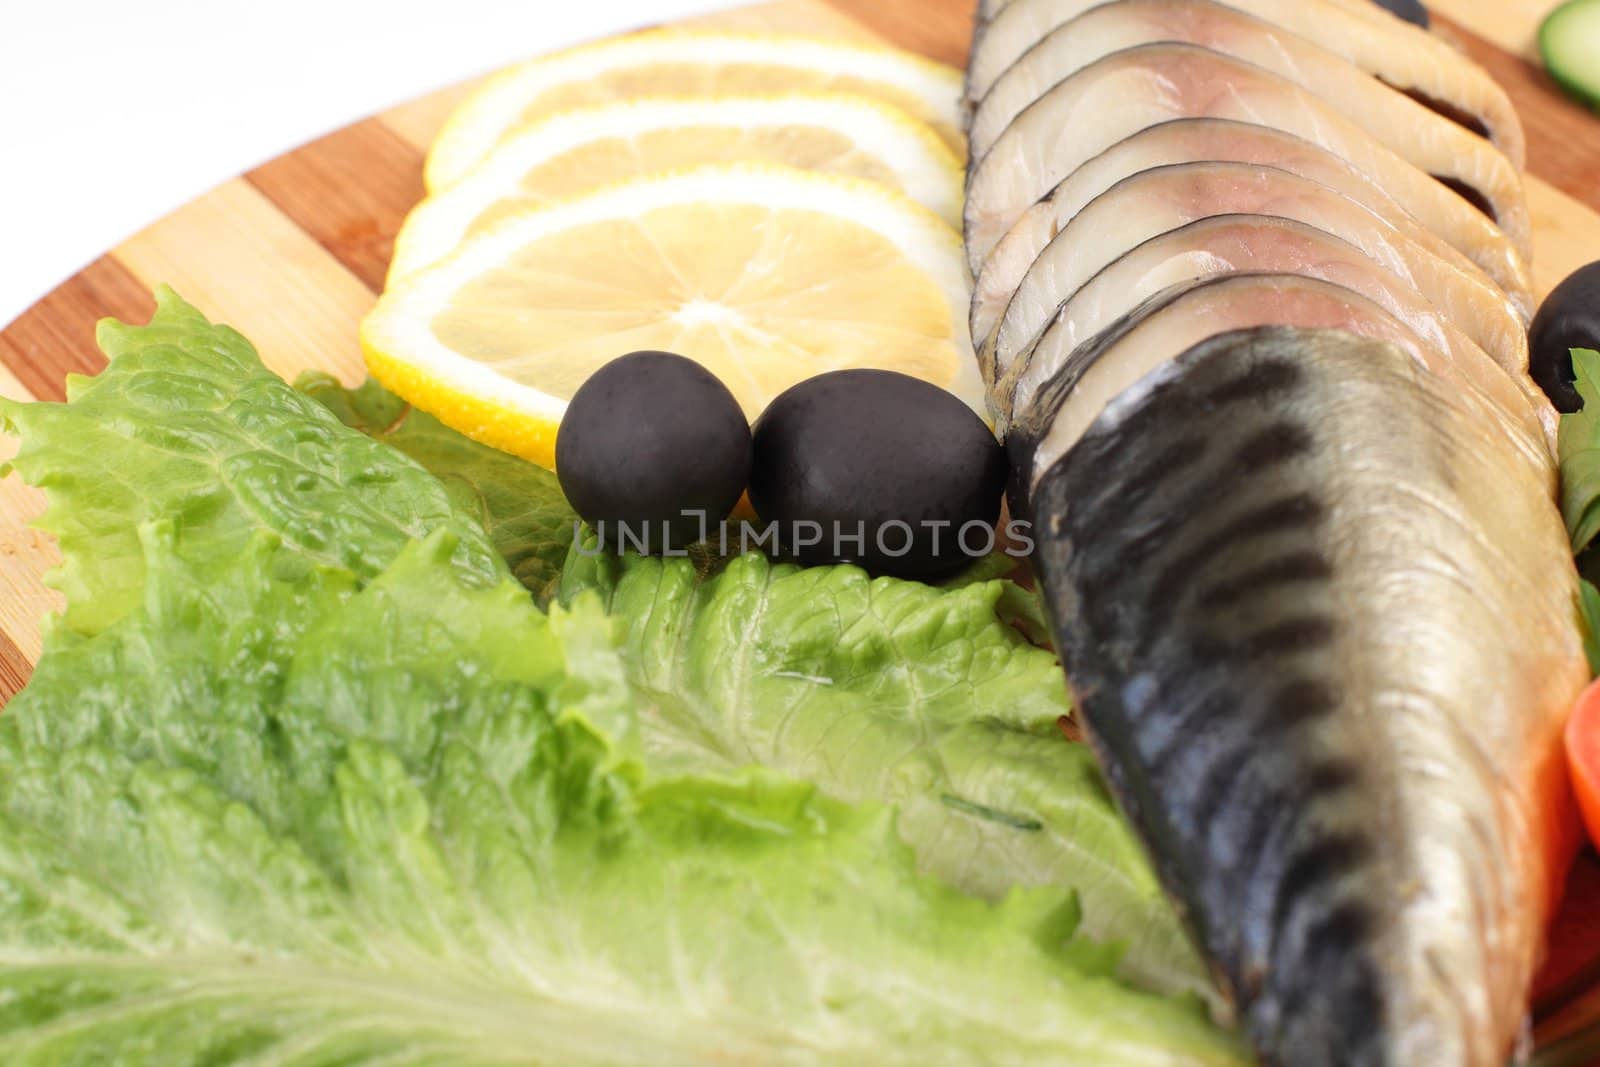 herring fillets with herbs by shutswis